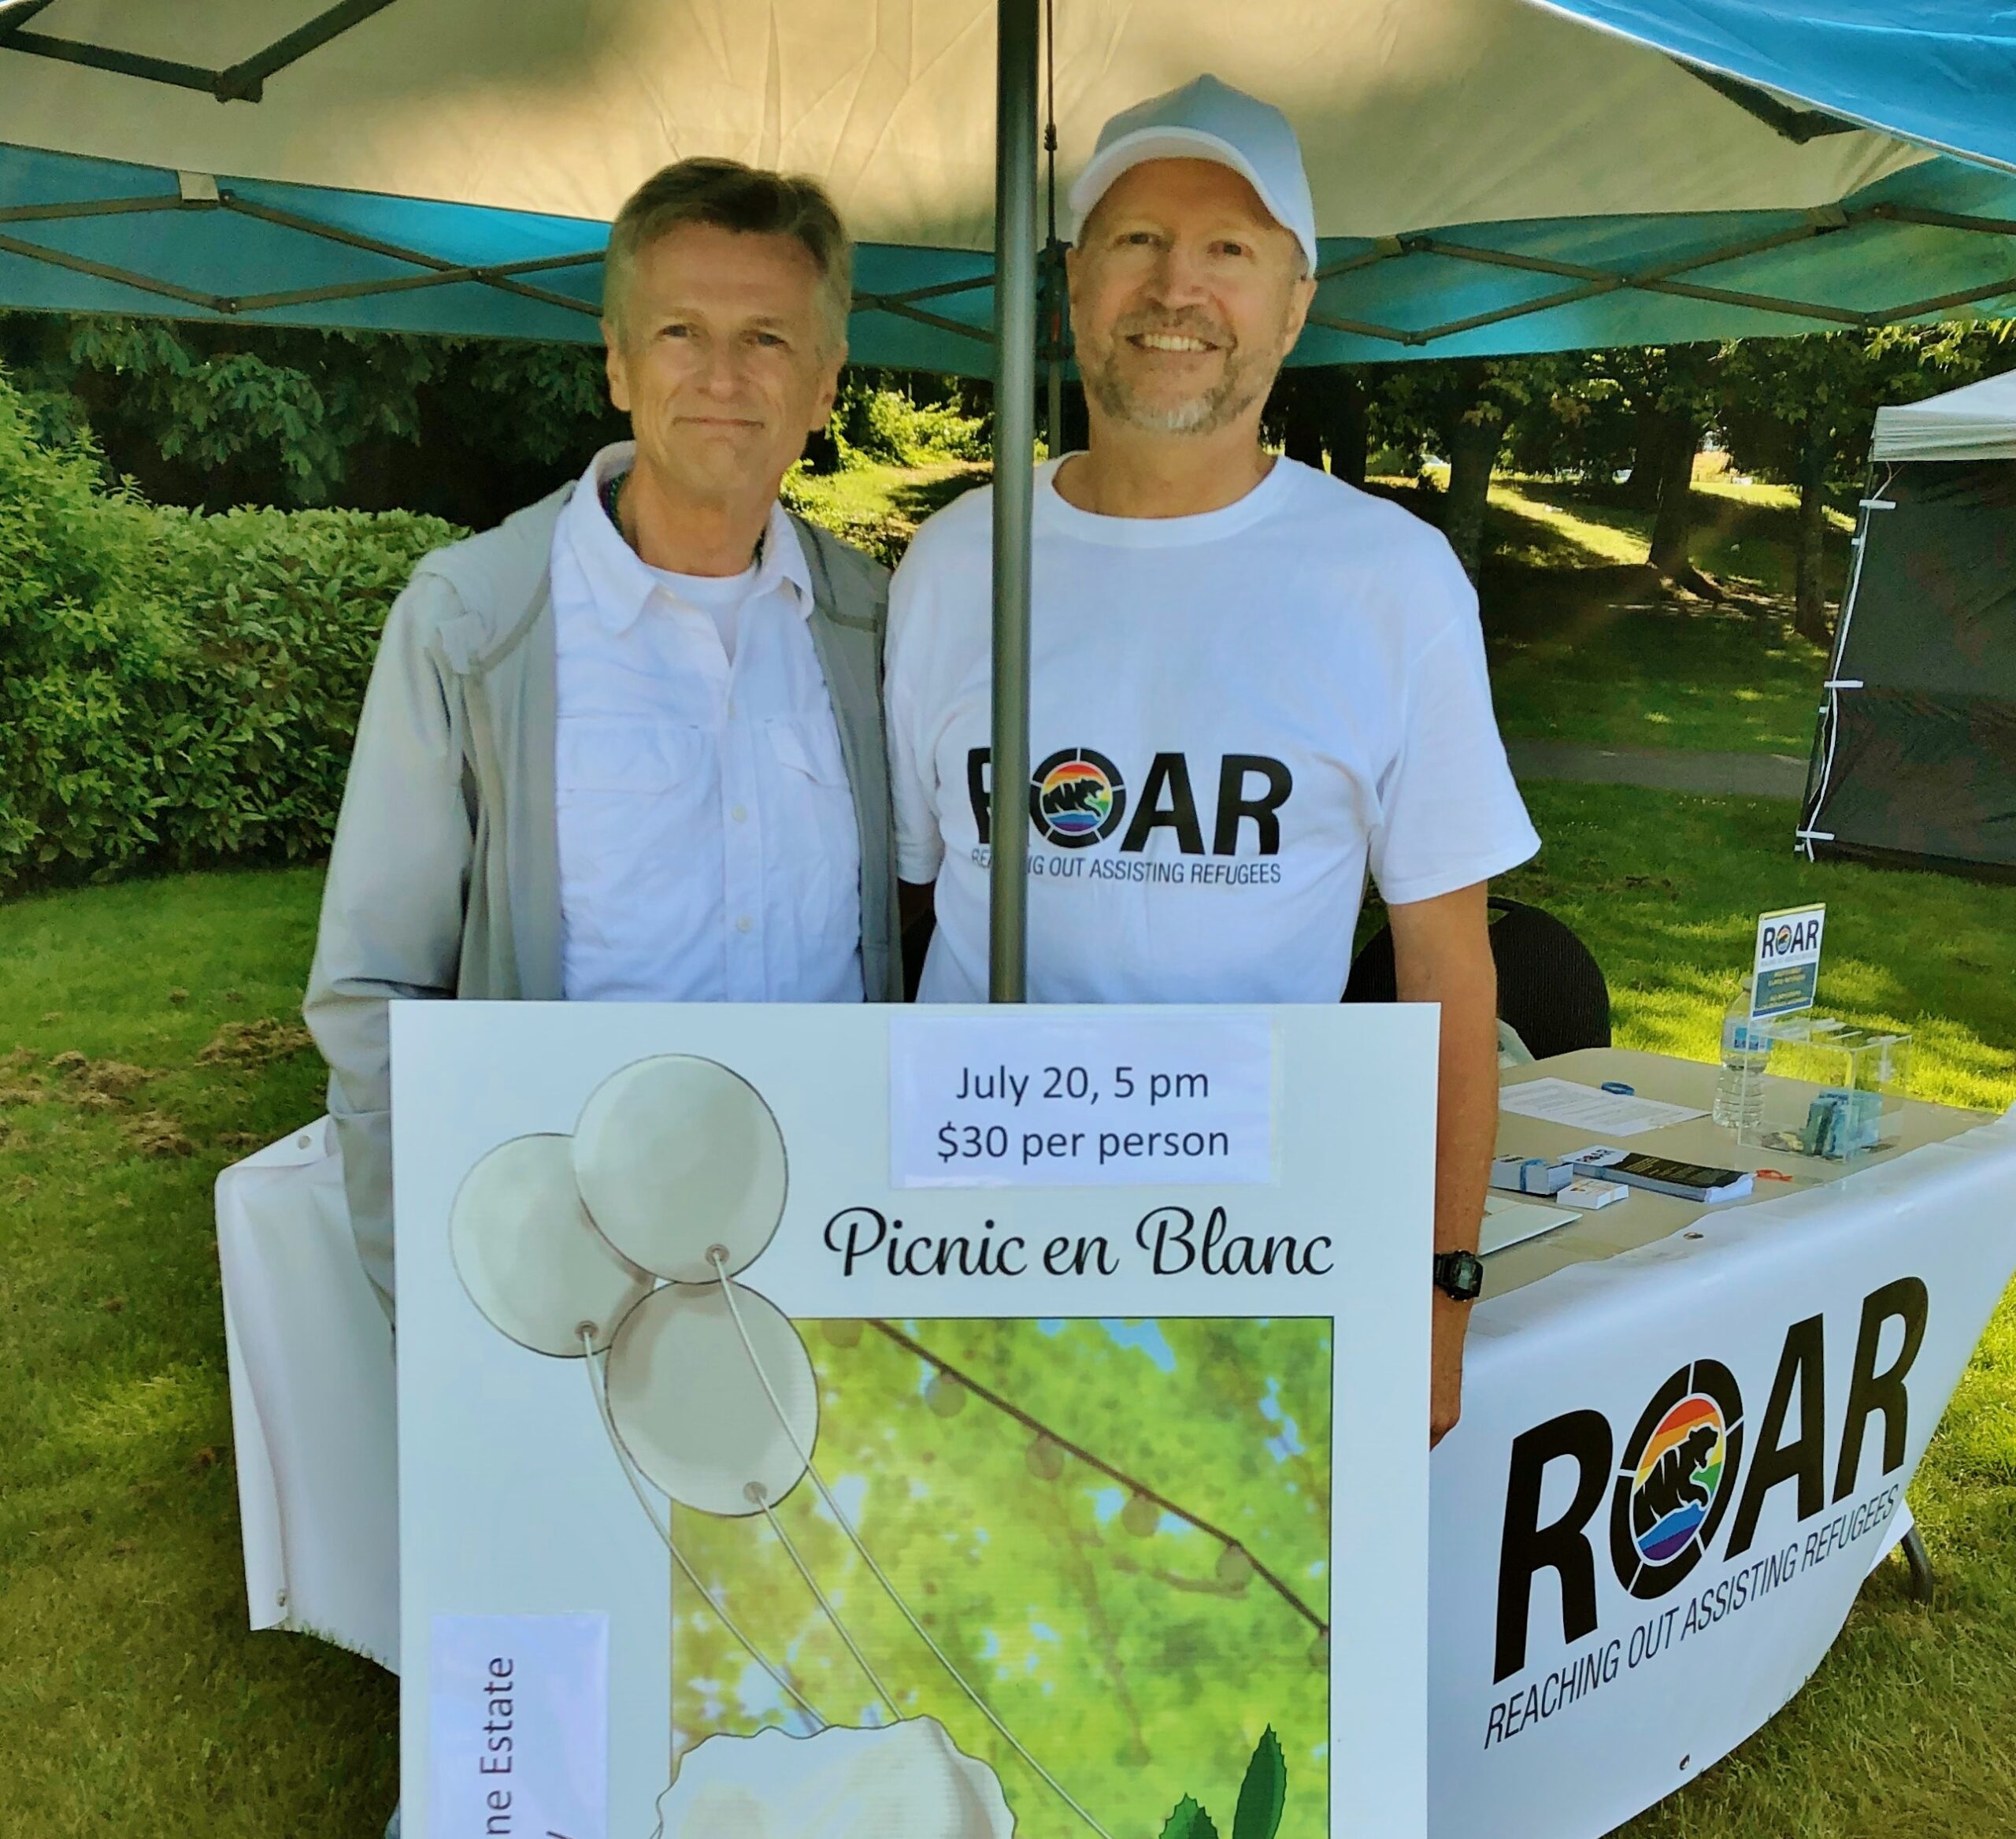 Mark Rabnett (left) and Horst Backé (right) at the ROAR booth at Nanaimo Pride. Credit: ROAR Refugee